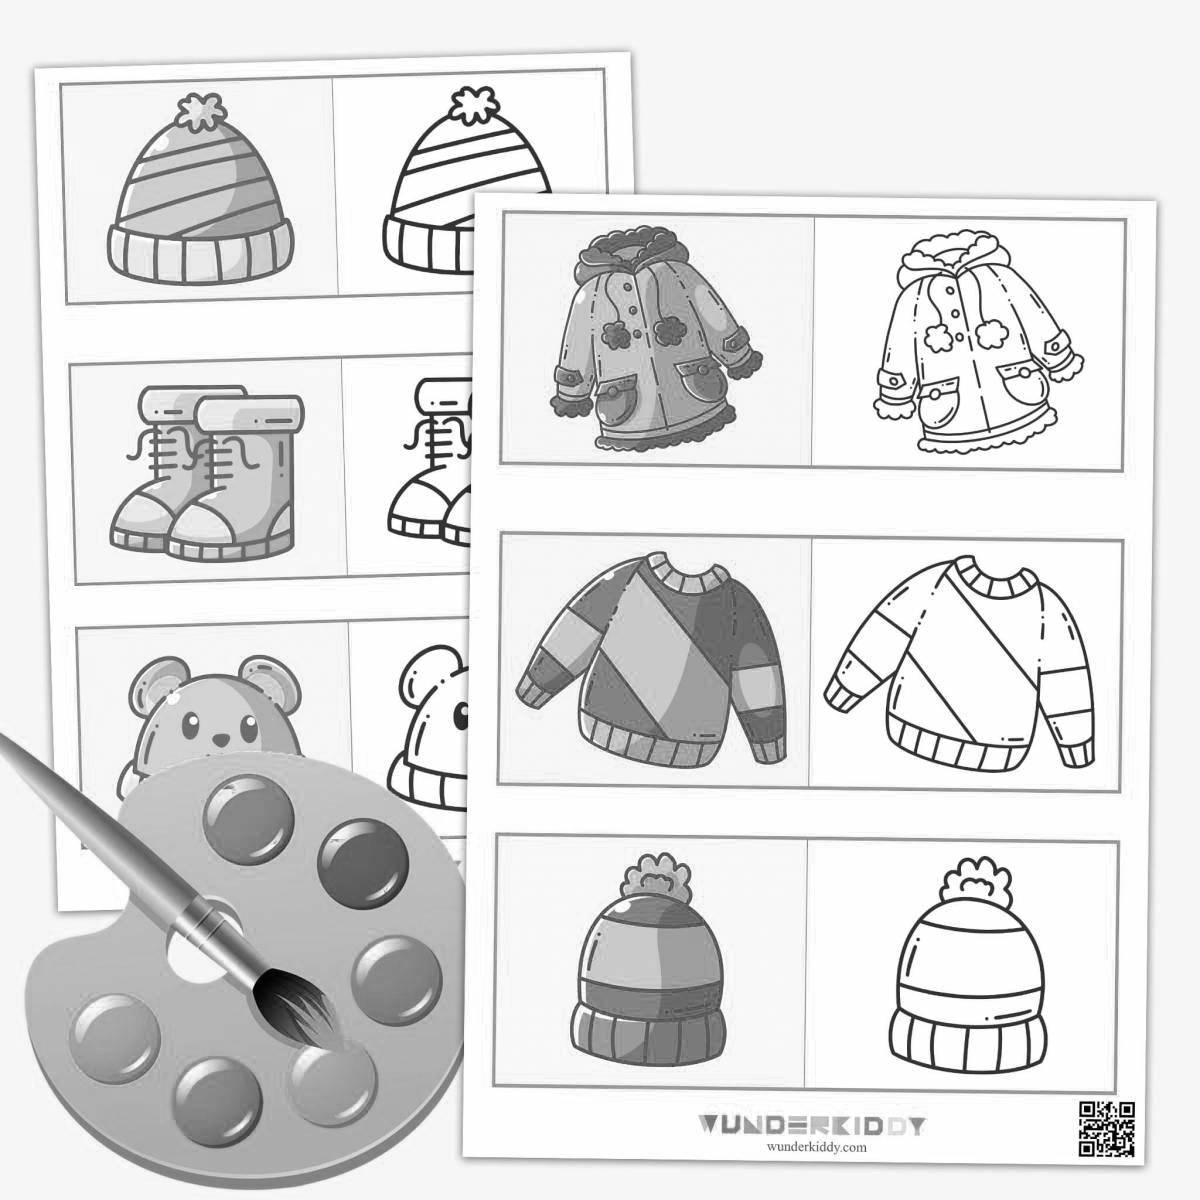 Gorgeous winter clothes coloring book for children 5-6 years old